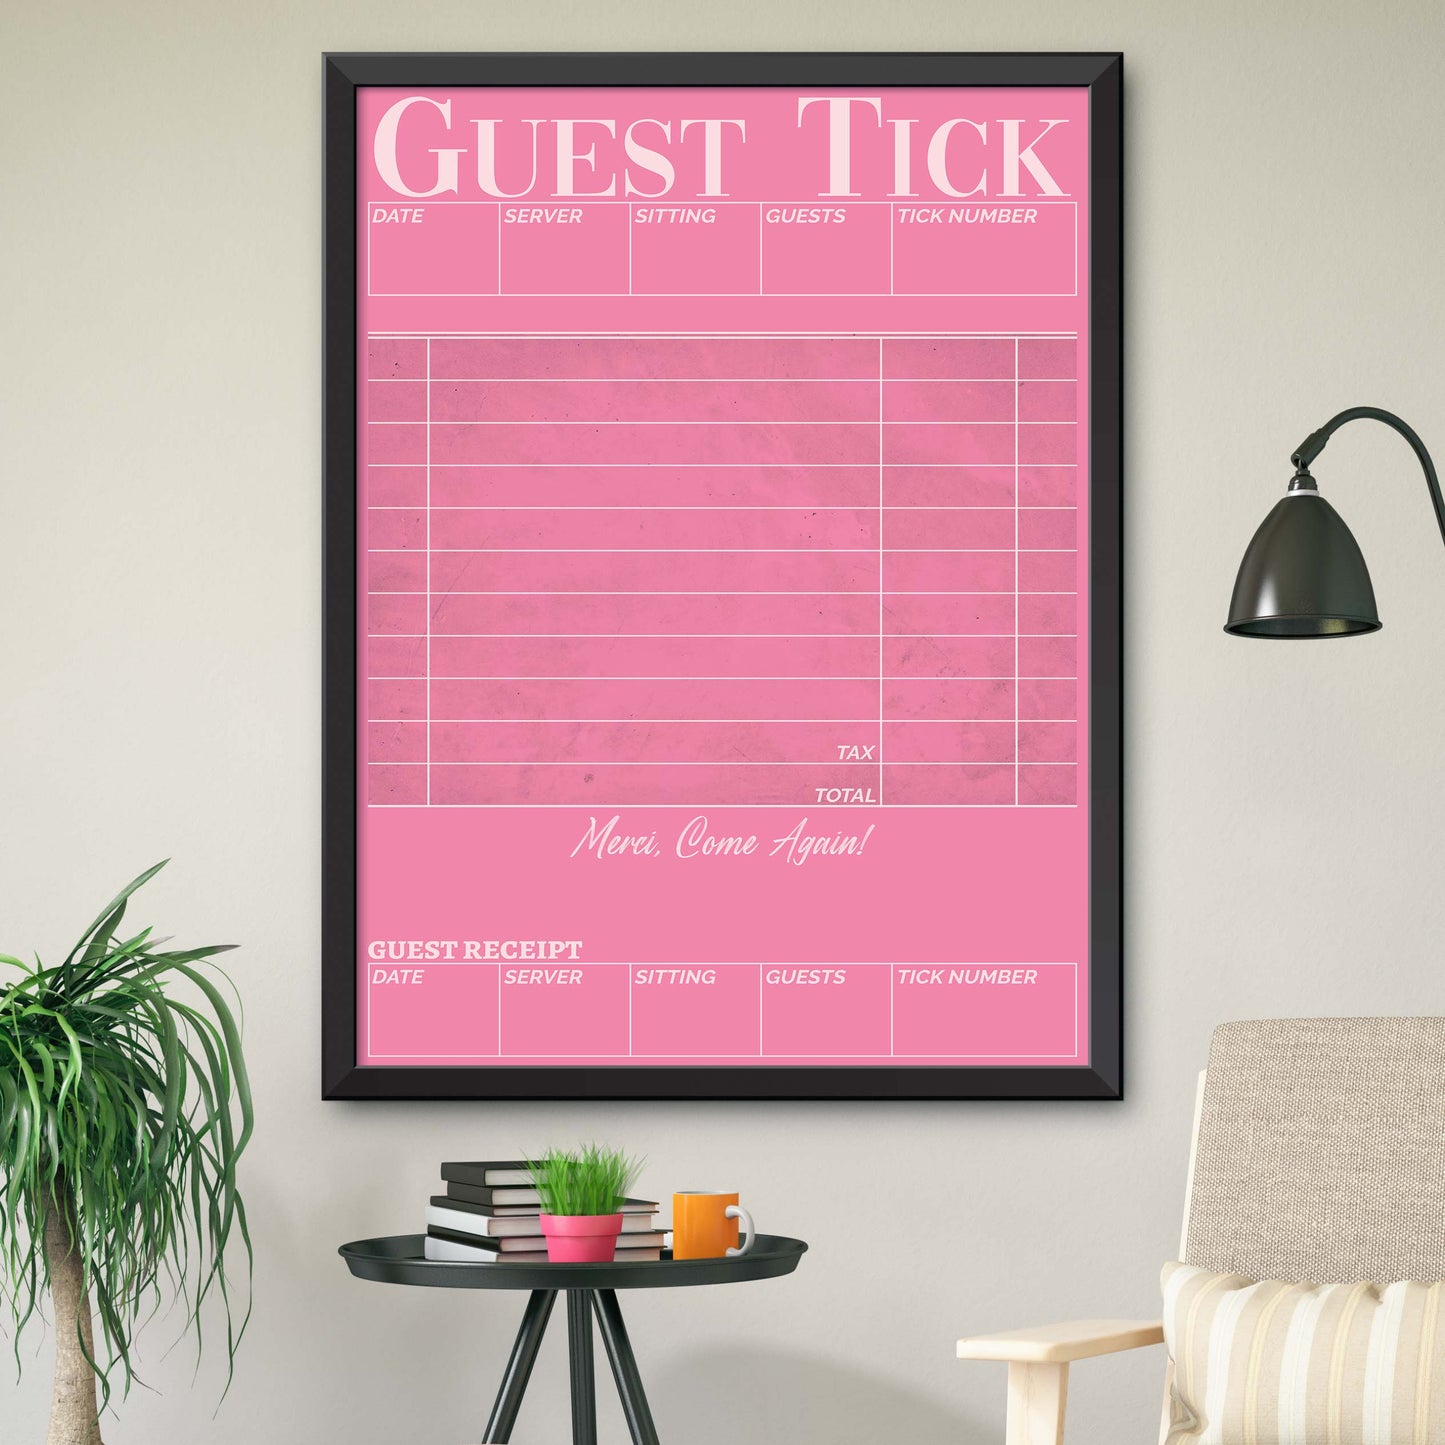 Guest Check Poster